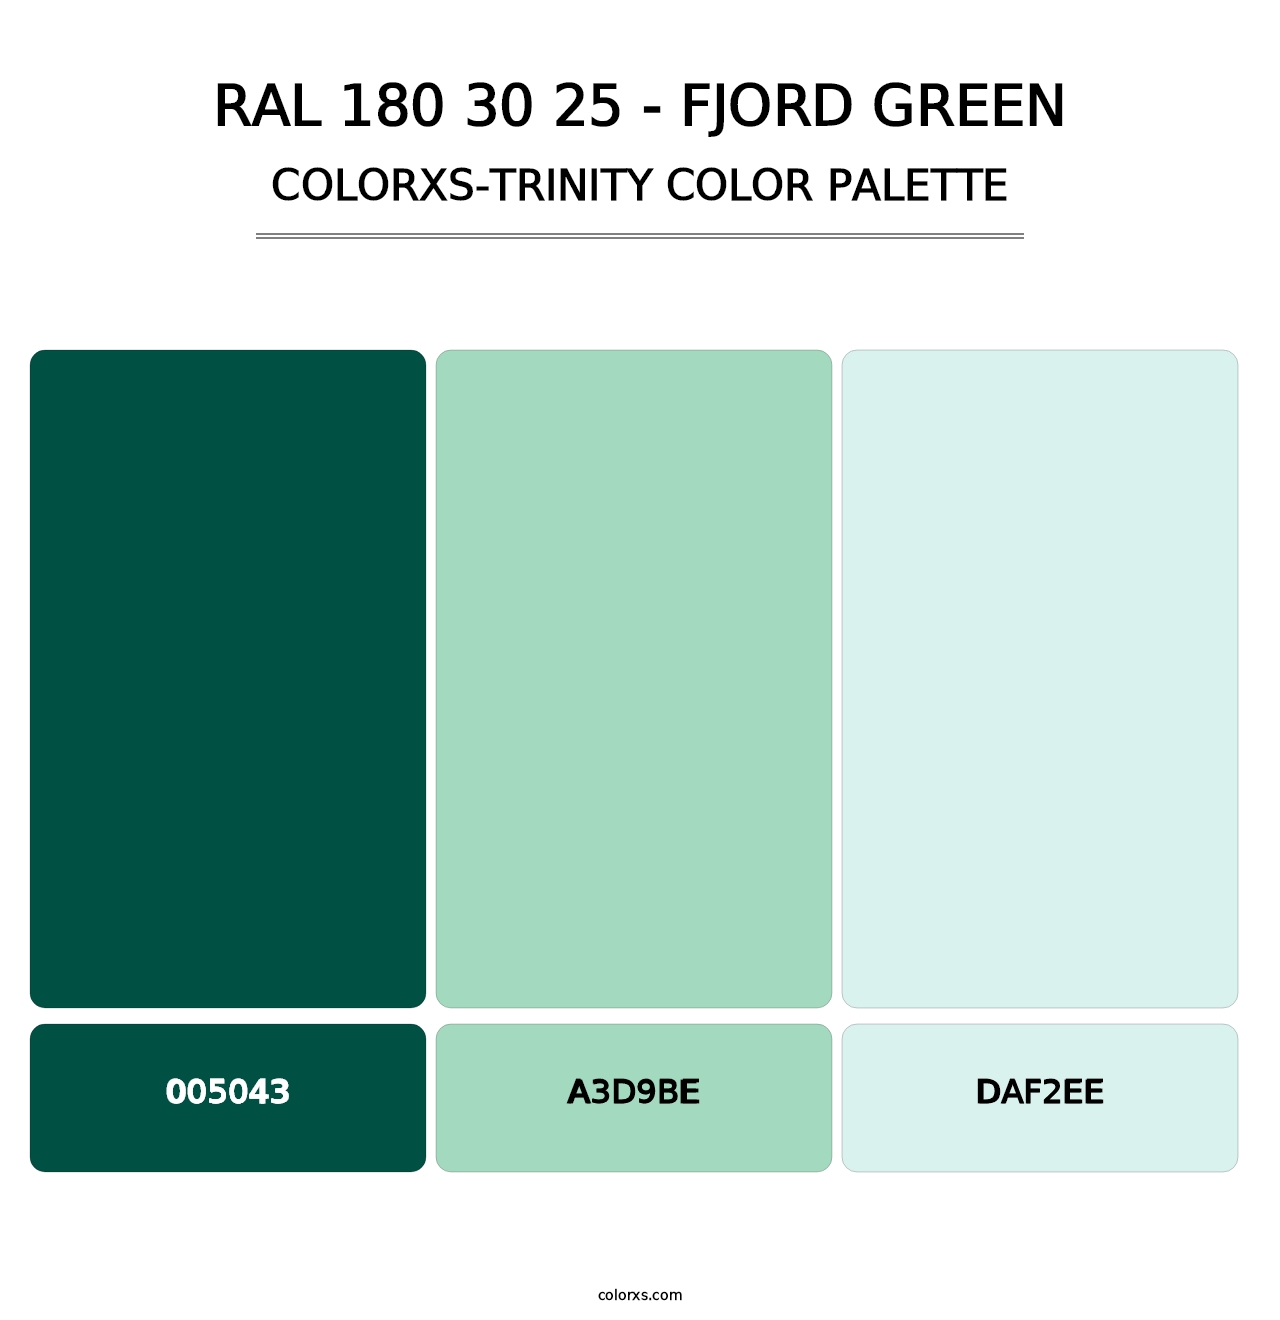 RAL 180 30 25 - Fjord Green - Colorxs Trinity Palette